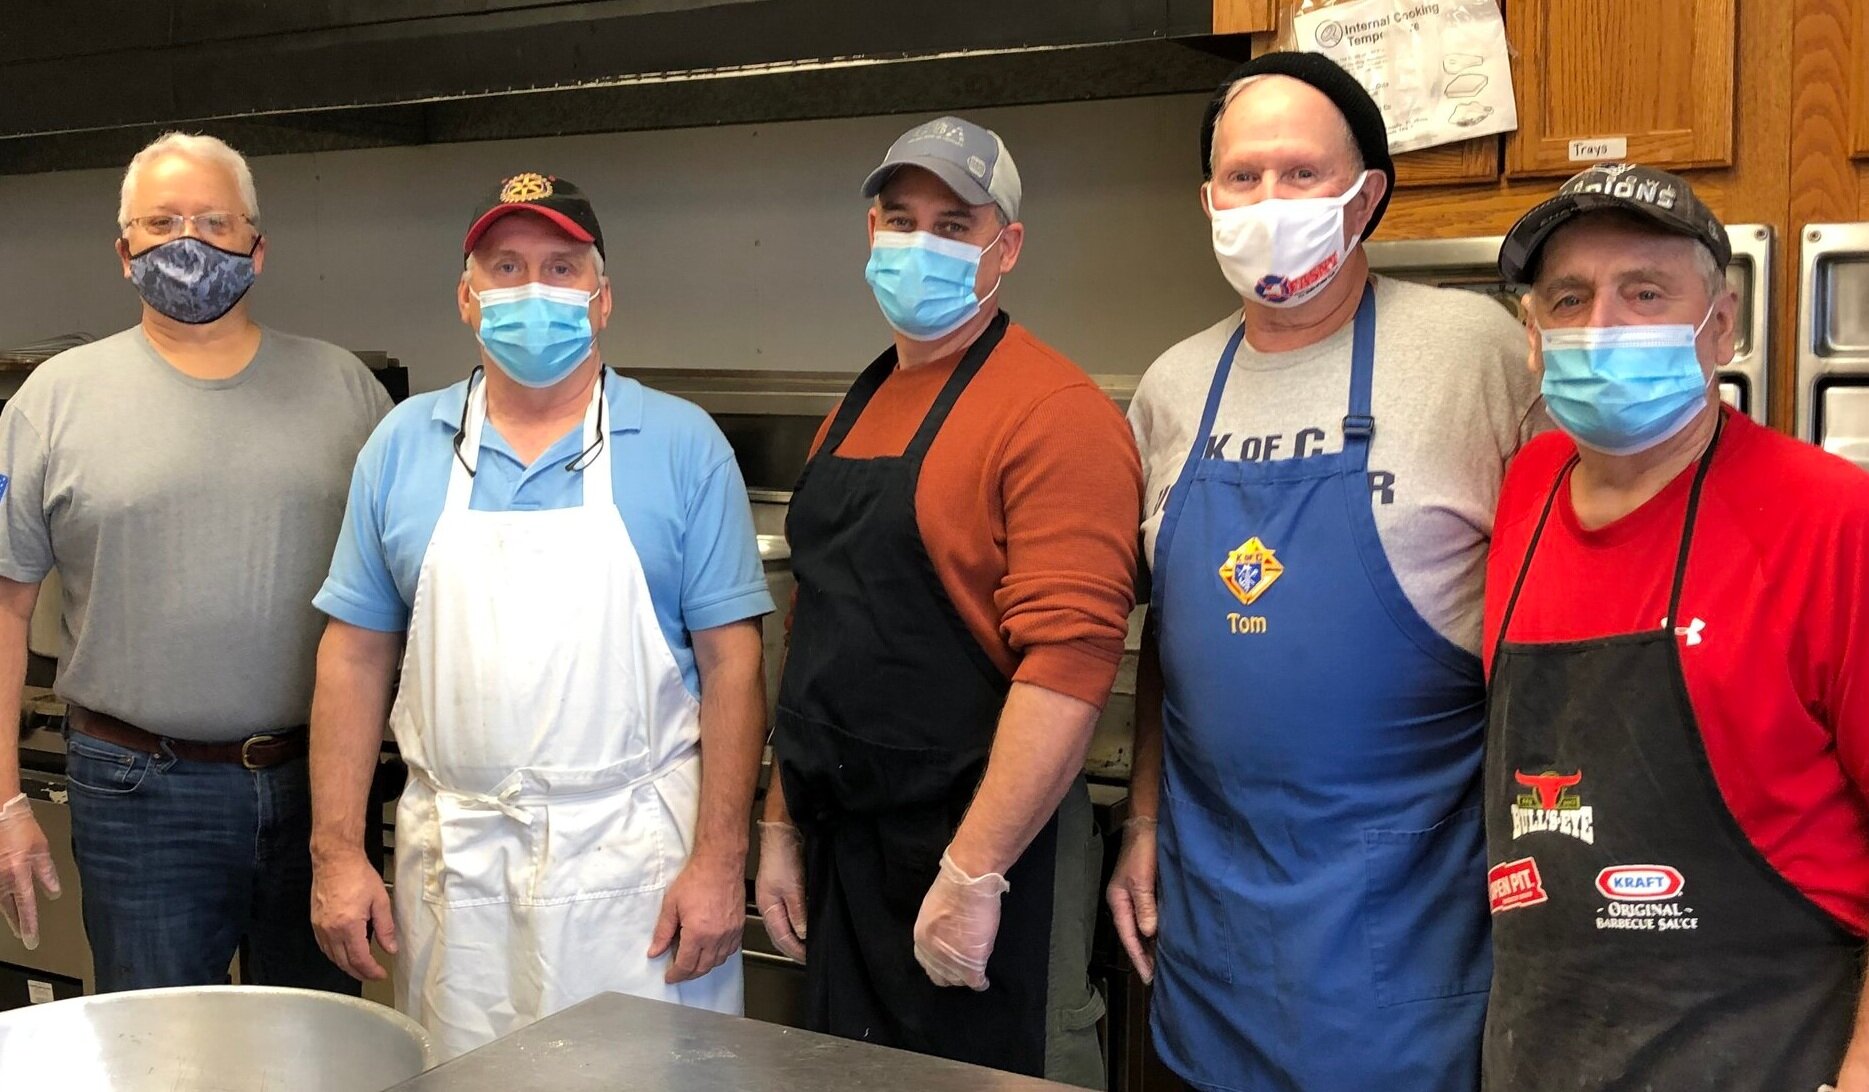    These five volunteers were the mainstay of Thursday's kitchen crew at the K. of C. hall.  All sporting face coverings were (from left) Mark Moeller, Yvon Fortier, John Bujold, Tom Arsenault and Dave LeBlanc. (Dan McClelland photos)  